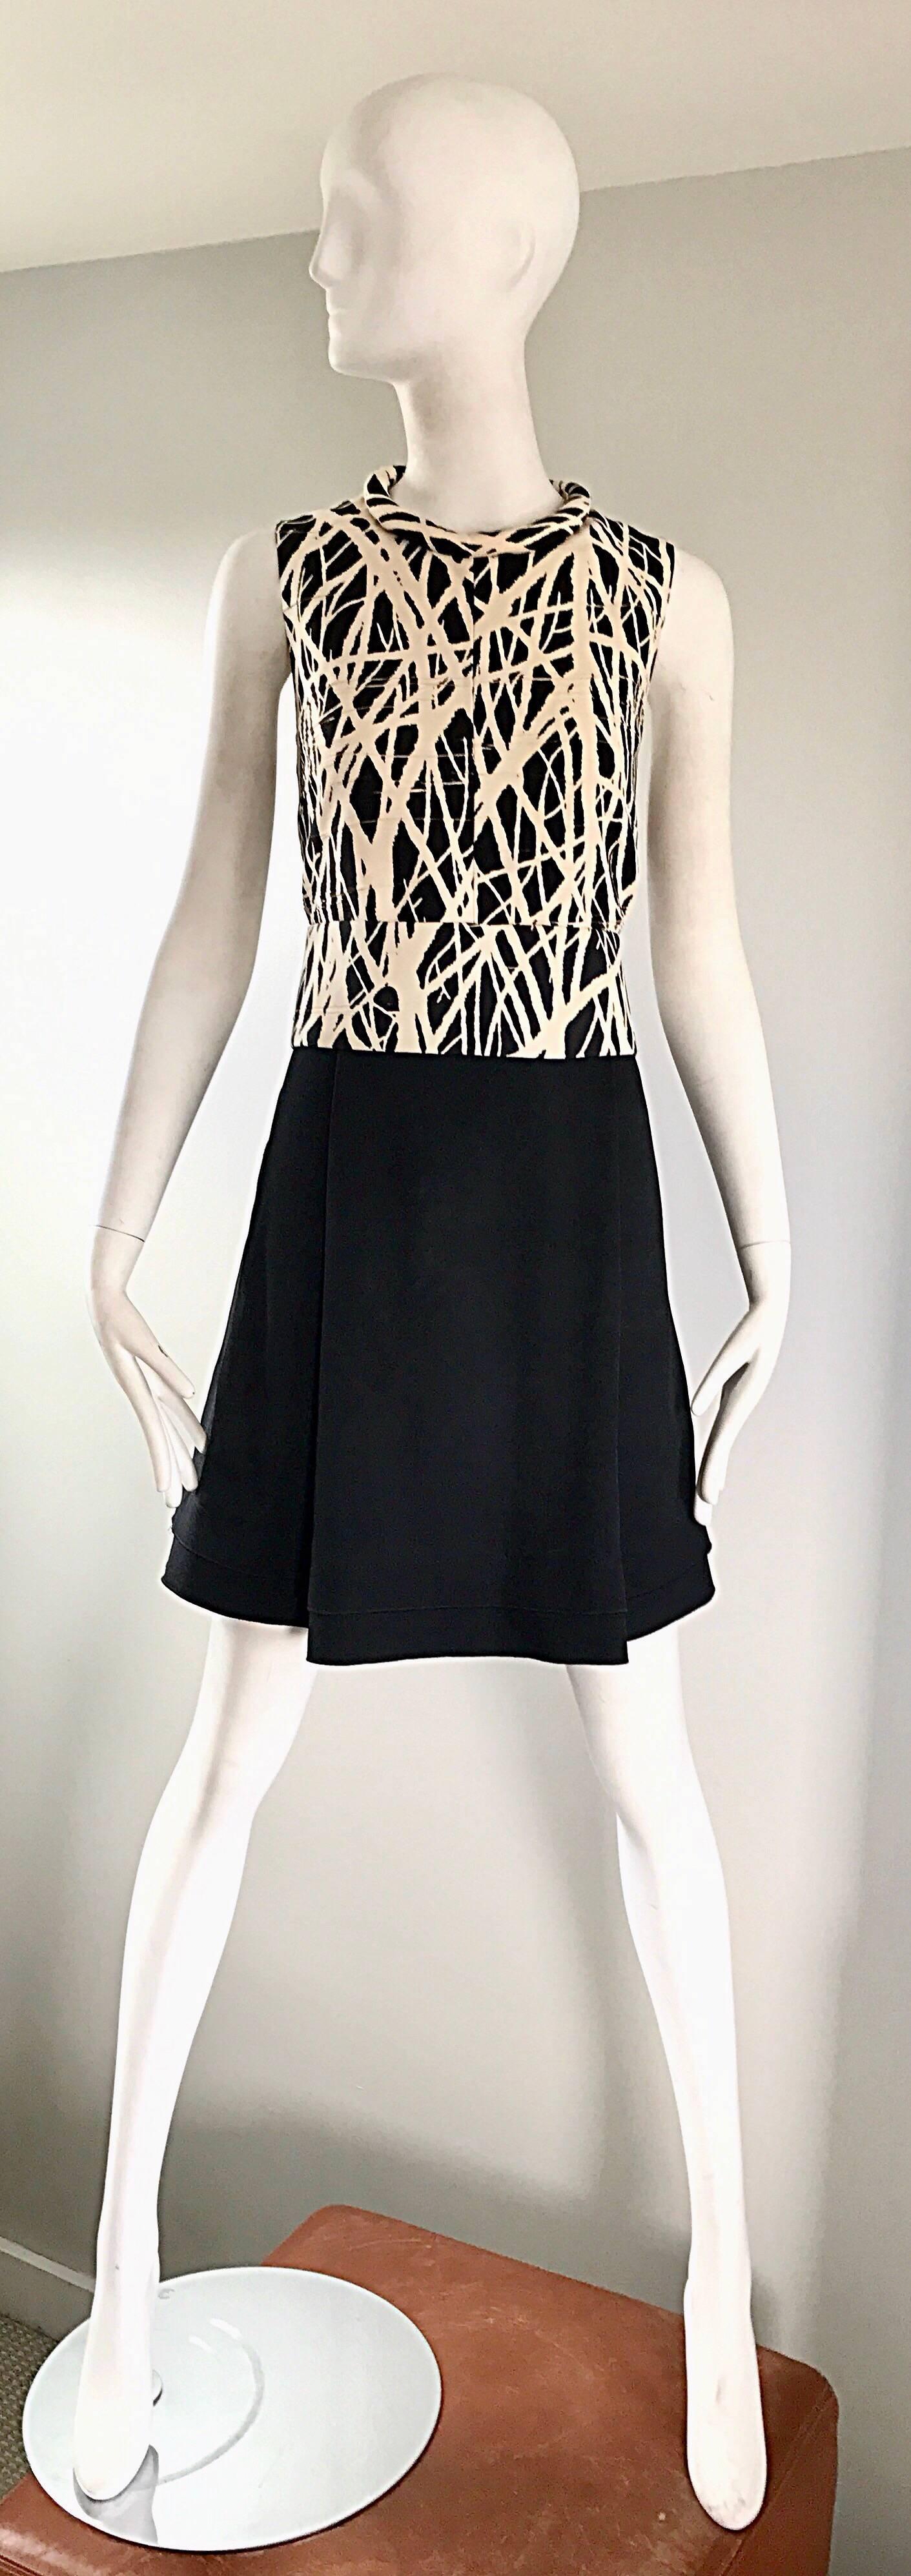 New Proenza Schouler Size 8 Black and White Abstract 1960s Style A Line Dress For Sale 2